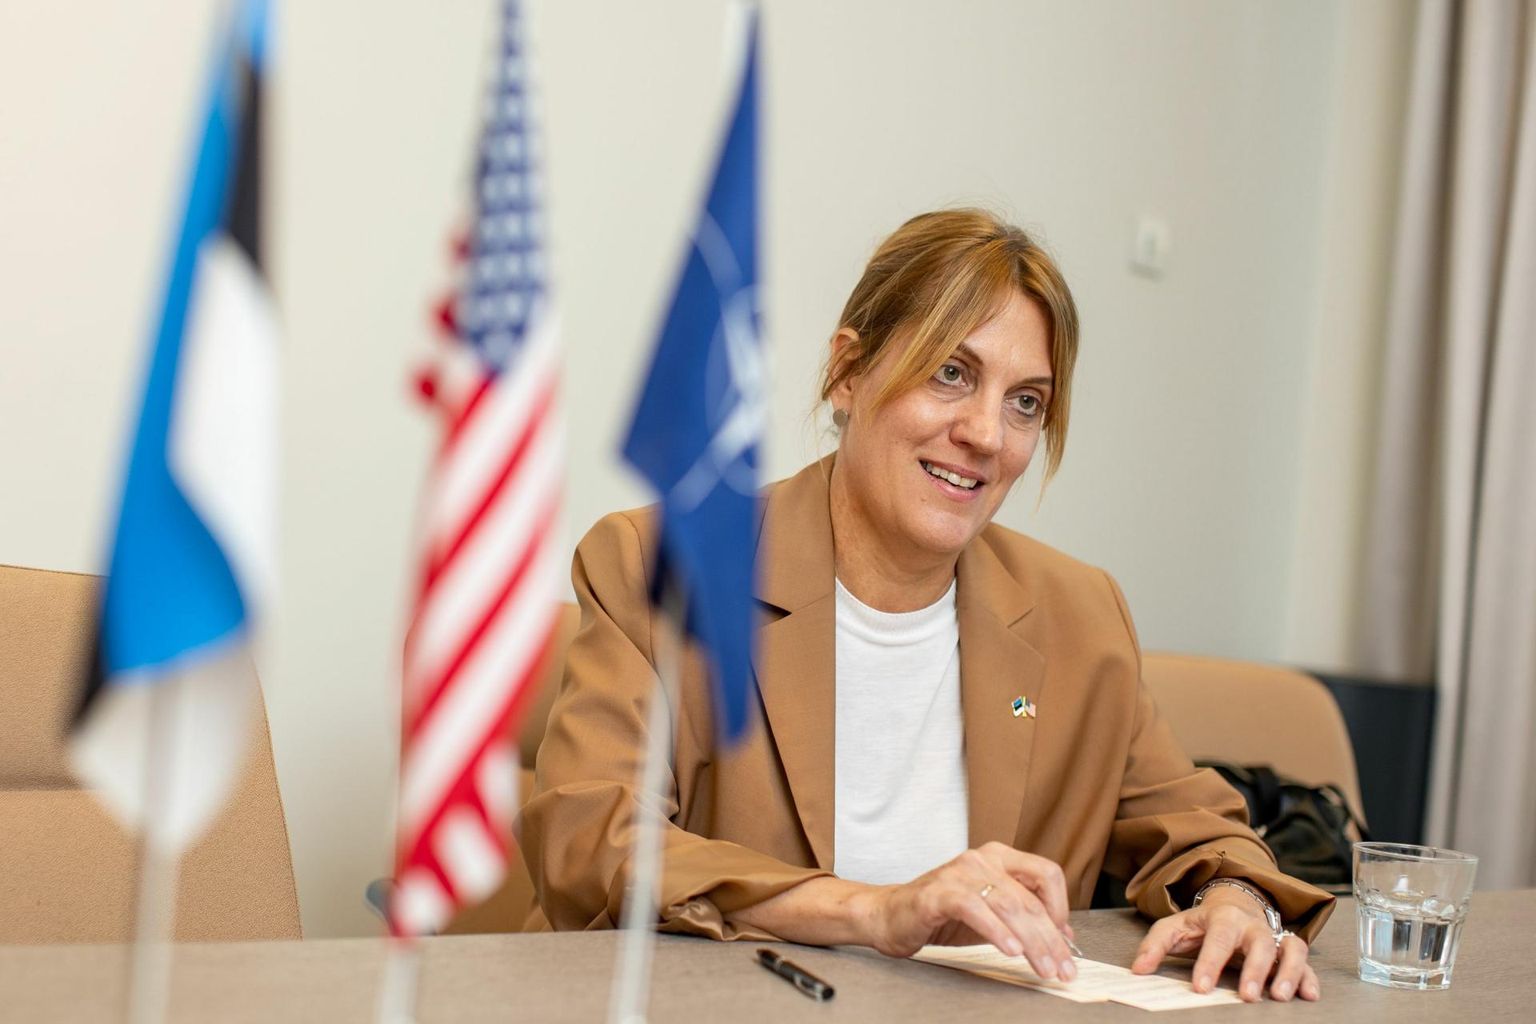 NATO knows that the future is unpredictable, says Rachel Ellehuus, the highest representative of the US Department of Defense to NATO, who attended the ABCD conference in Tallinn.